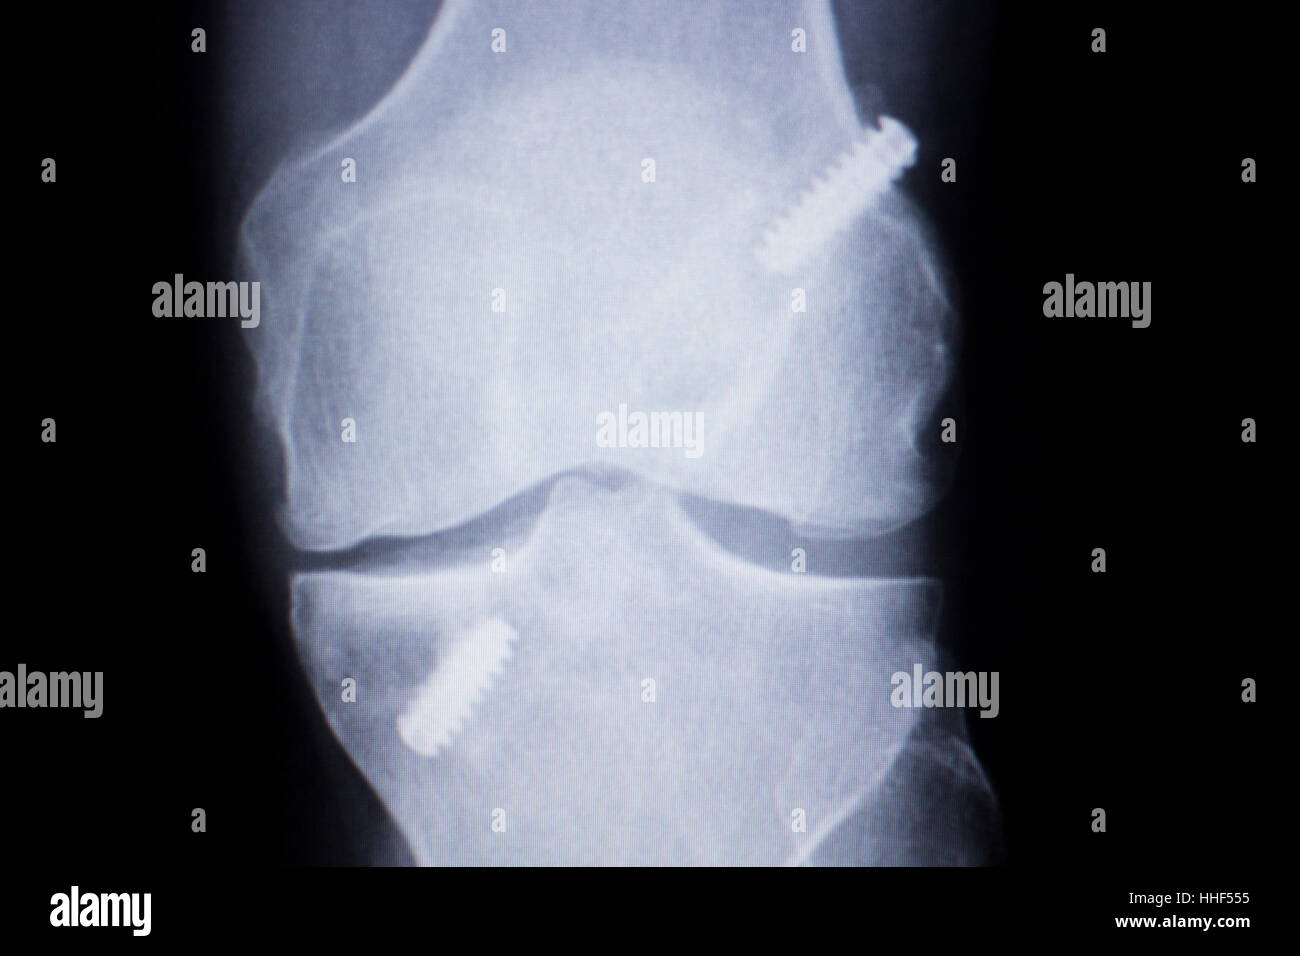 Knee joint implant screw xray showing in medical orthpodedic ...